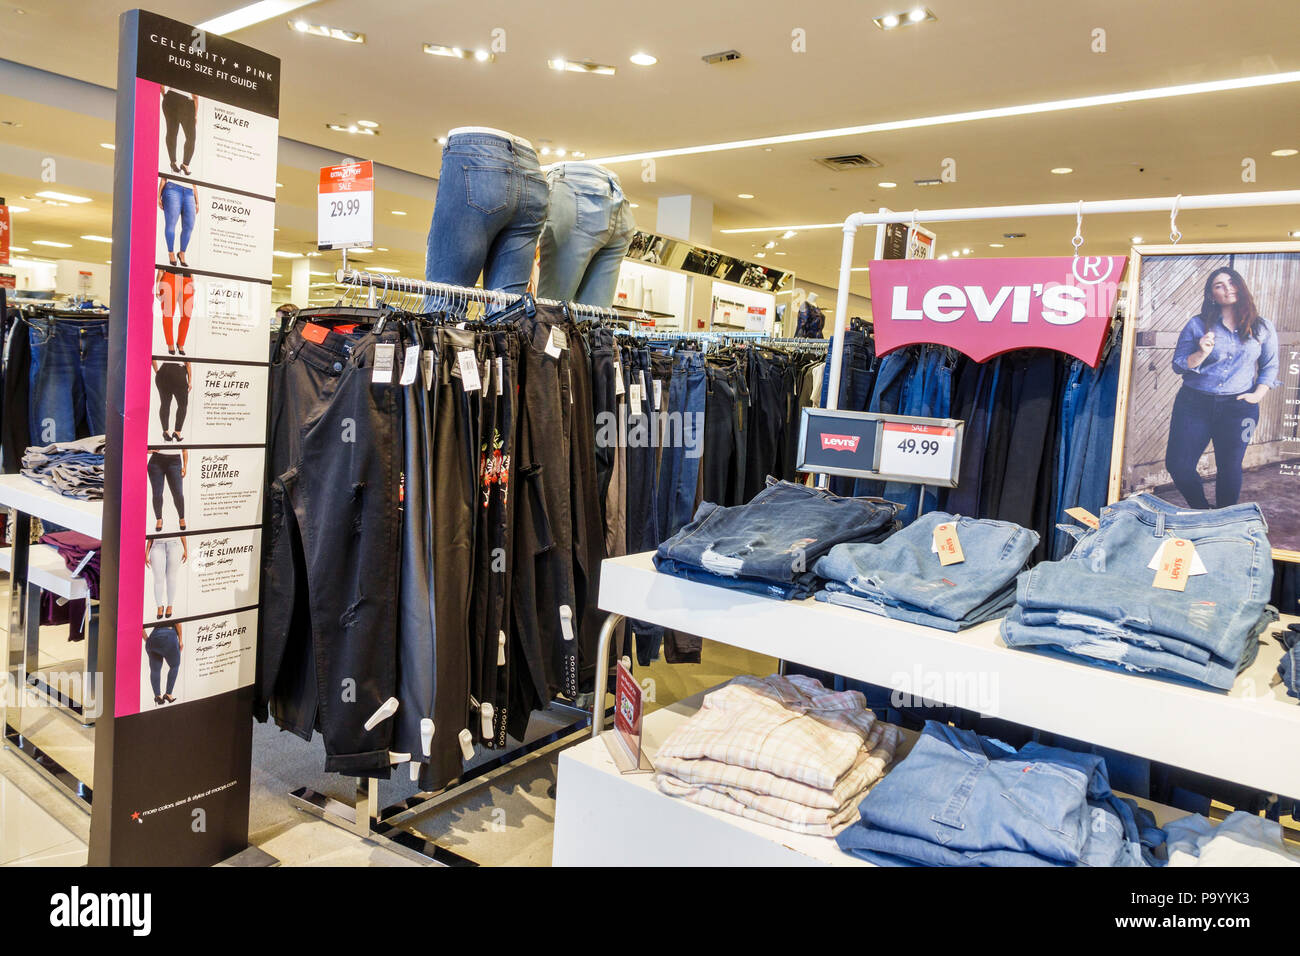 Levi's Store Interior High Resolution Stock Photography and Images - Alamy